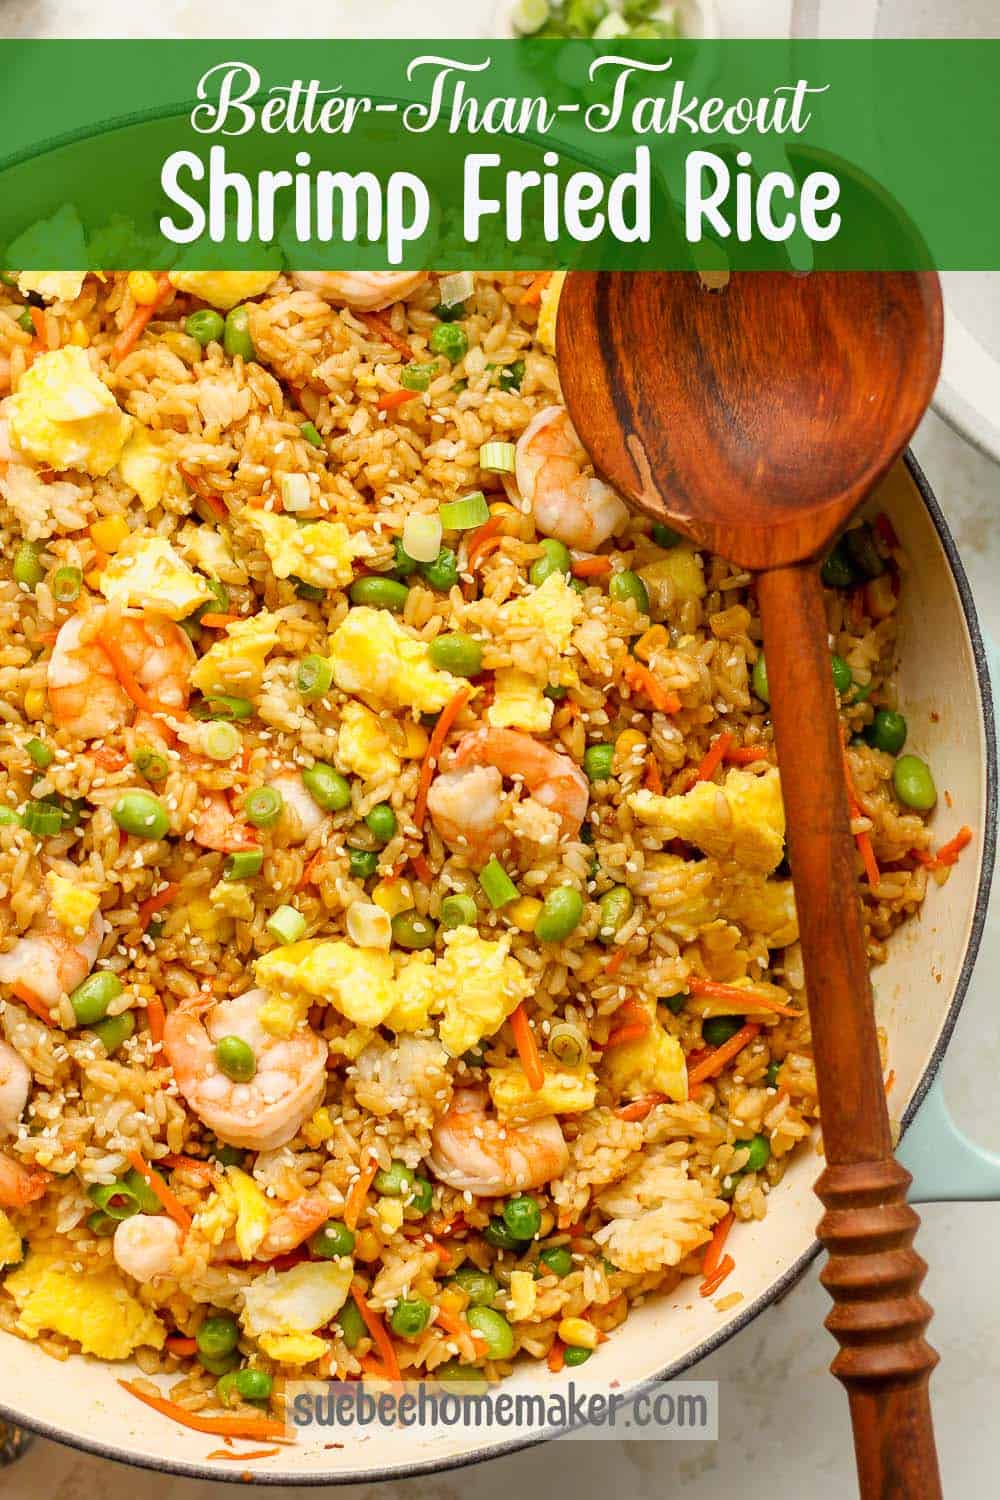 A large pan of shrimp fried rice with a wooden spoon.